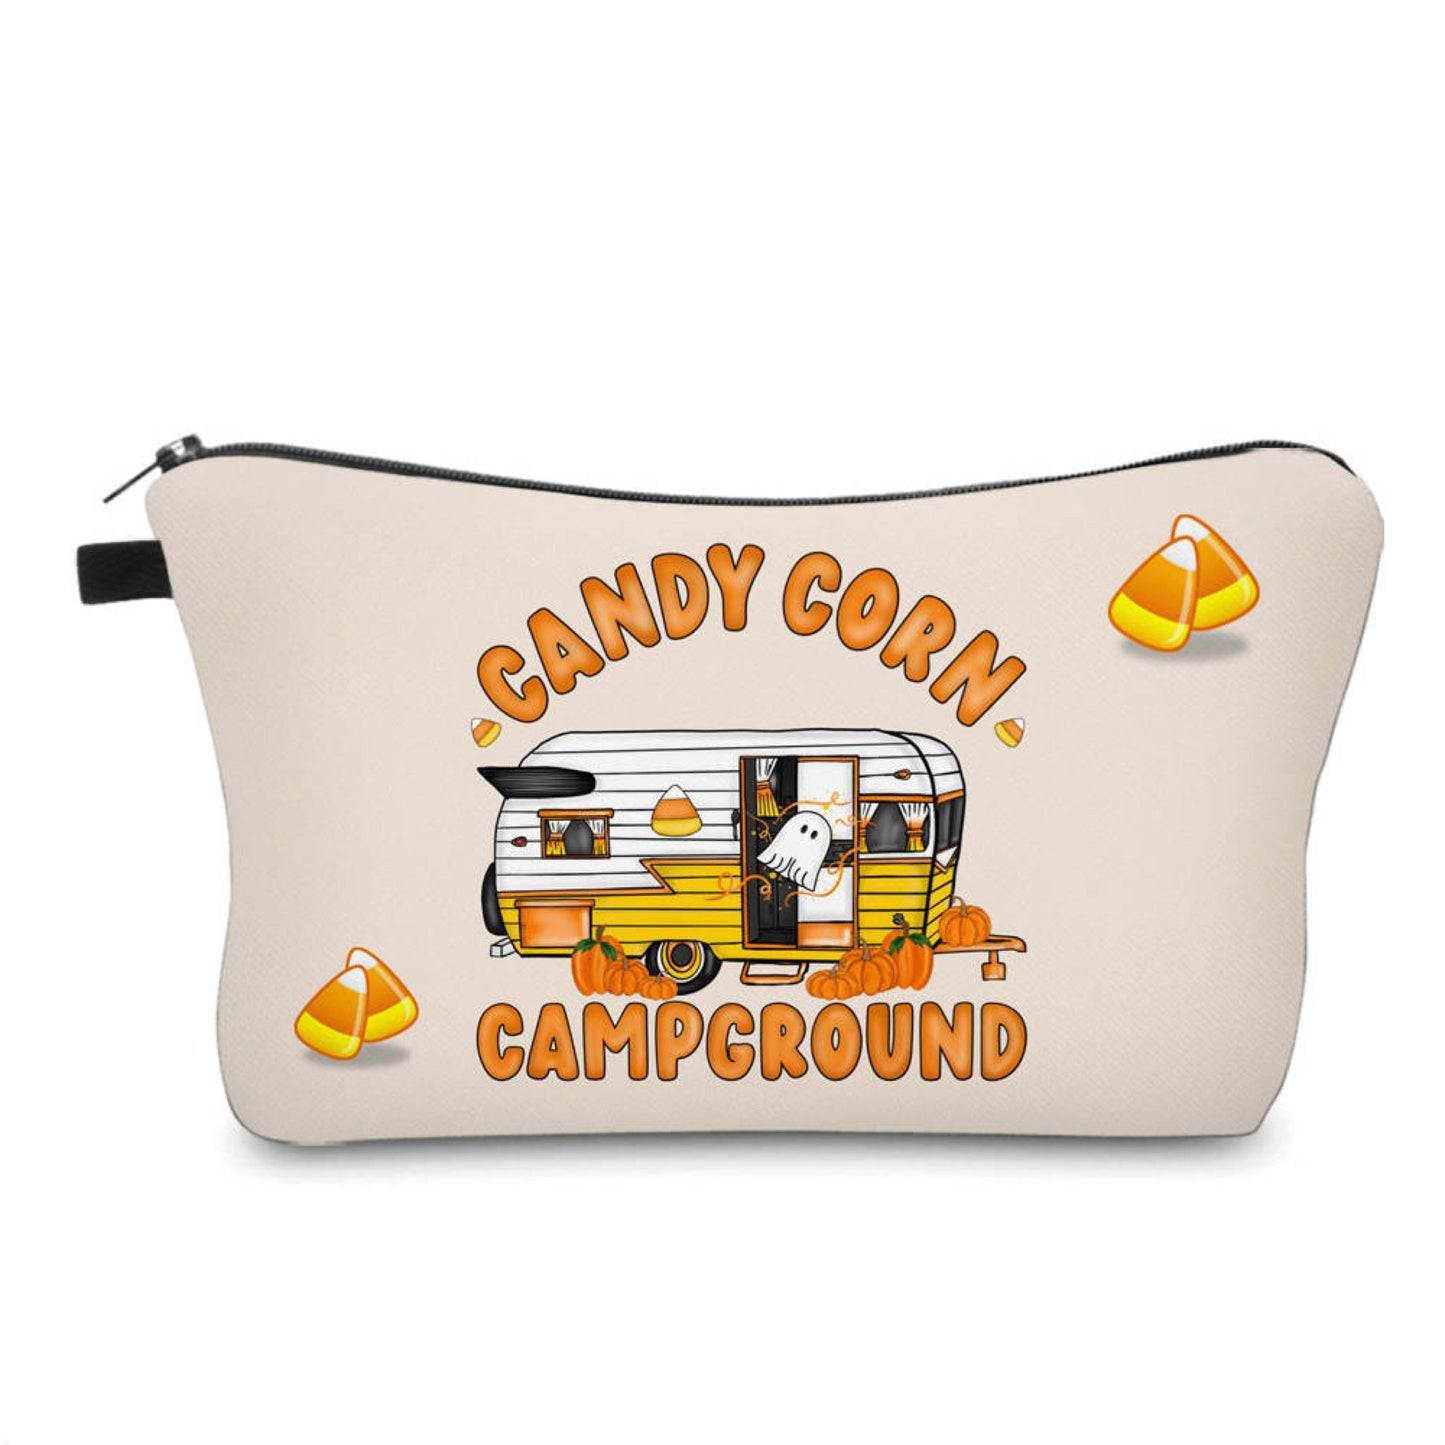 Candy Corn Campground - Water-Resistant Multi-Use Pouch